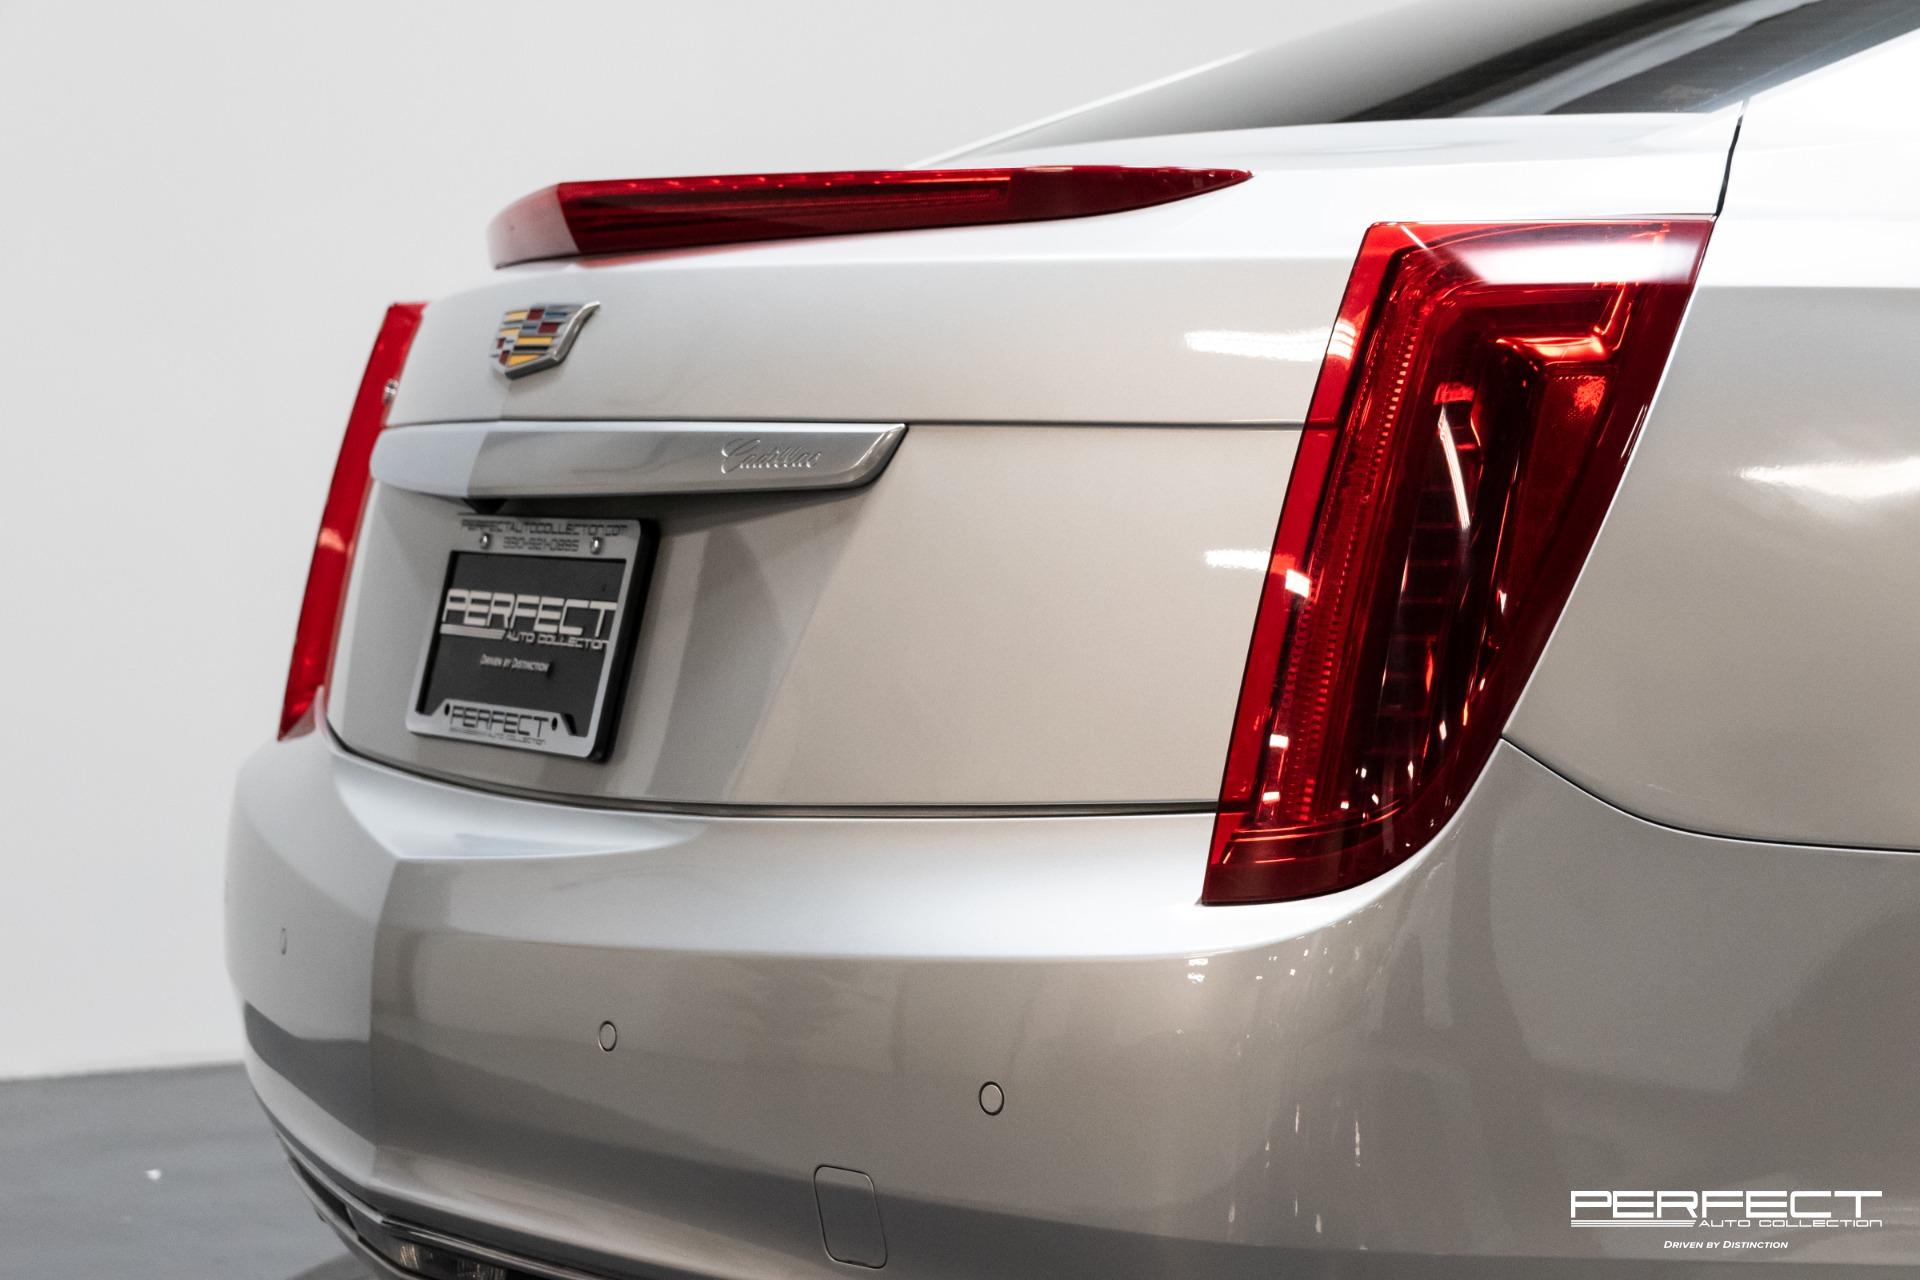 XTS Auto Stock #FA537708B Sale Collection Perfect Luxury For Cadillac 2016 | (Sold) Used